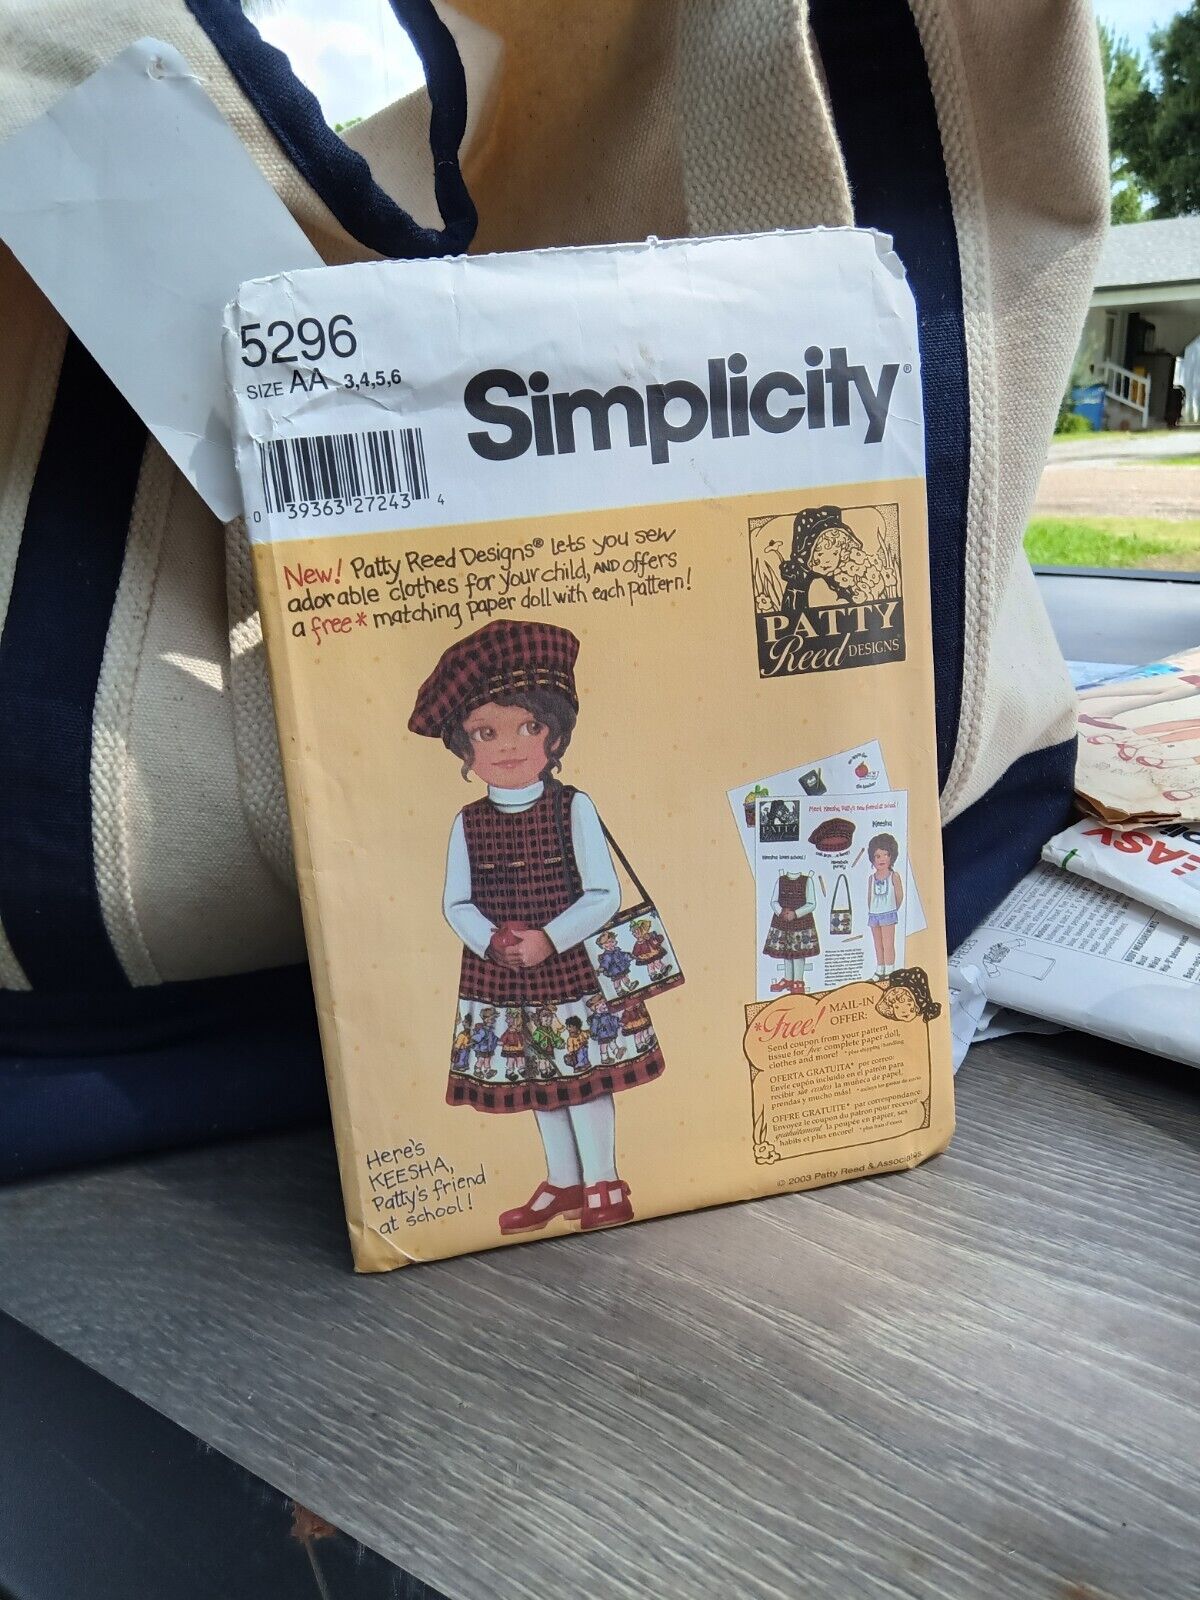 Simplicity Vintage Girl\'s Dress Patty Reed Sewing Pattern. 5296. Sz AA 3,4,5,6.